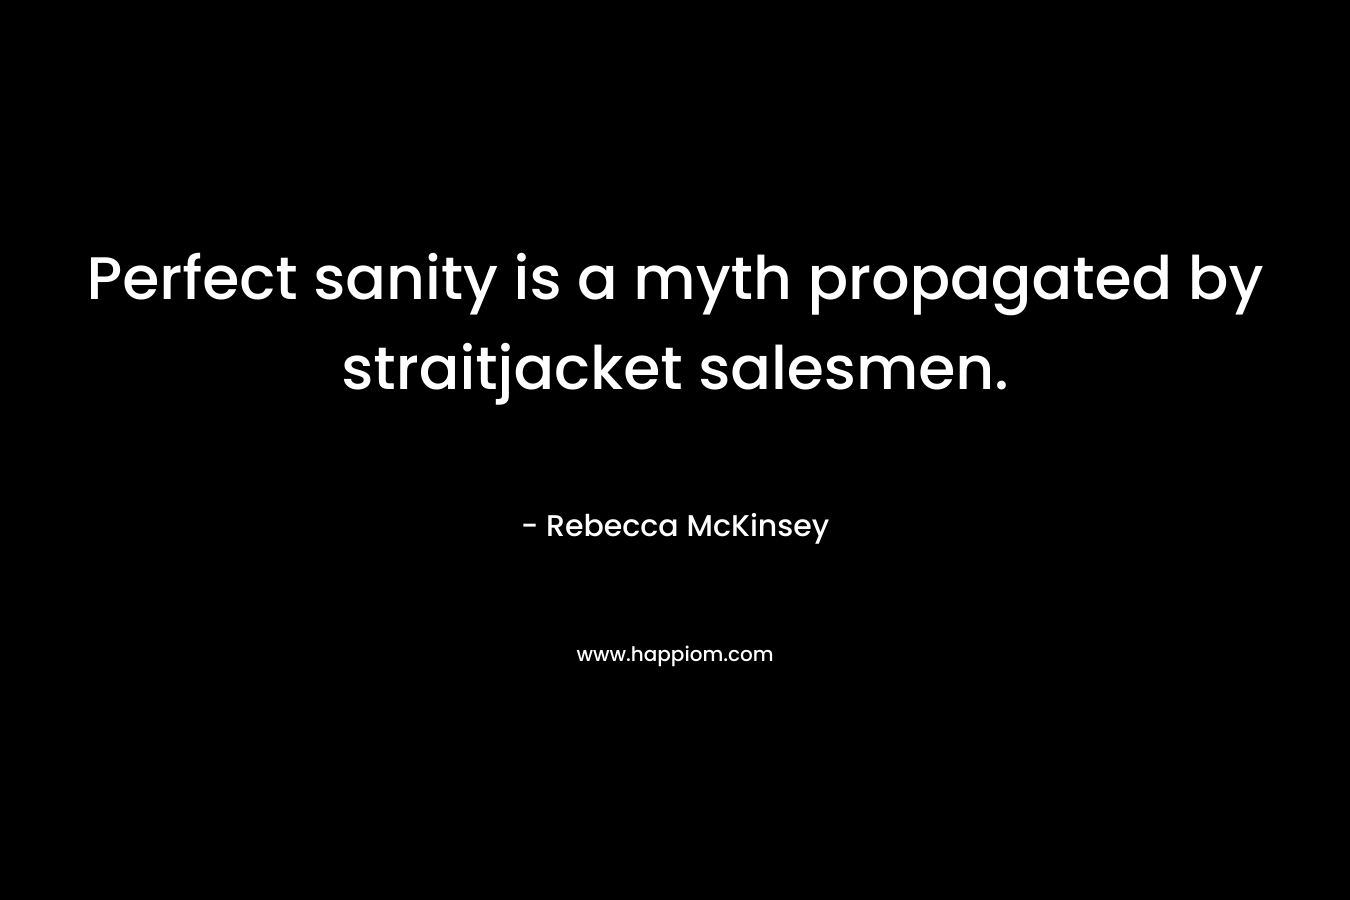 Perfect sanity is a myth propagated by straitjacket salesmen. – Rebecca McKinsey